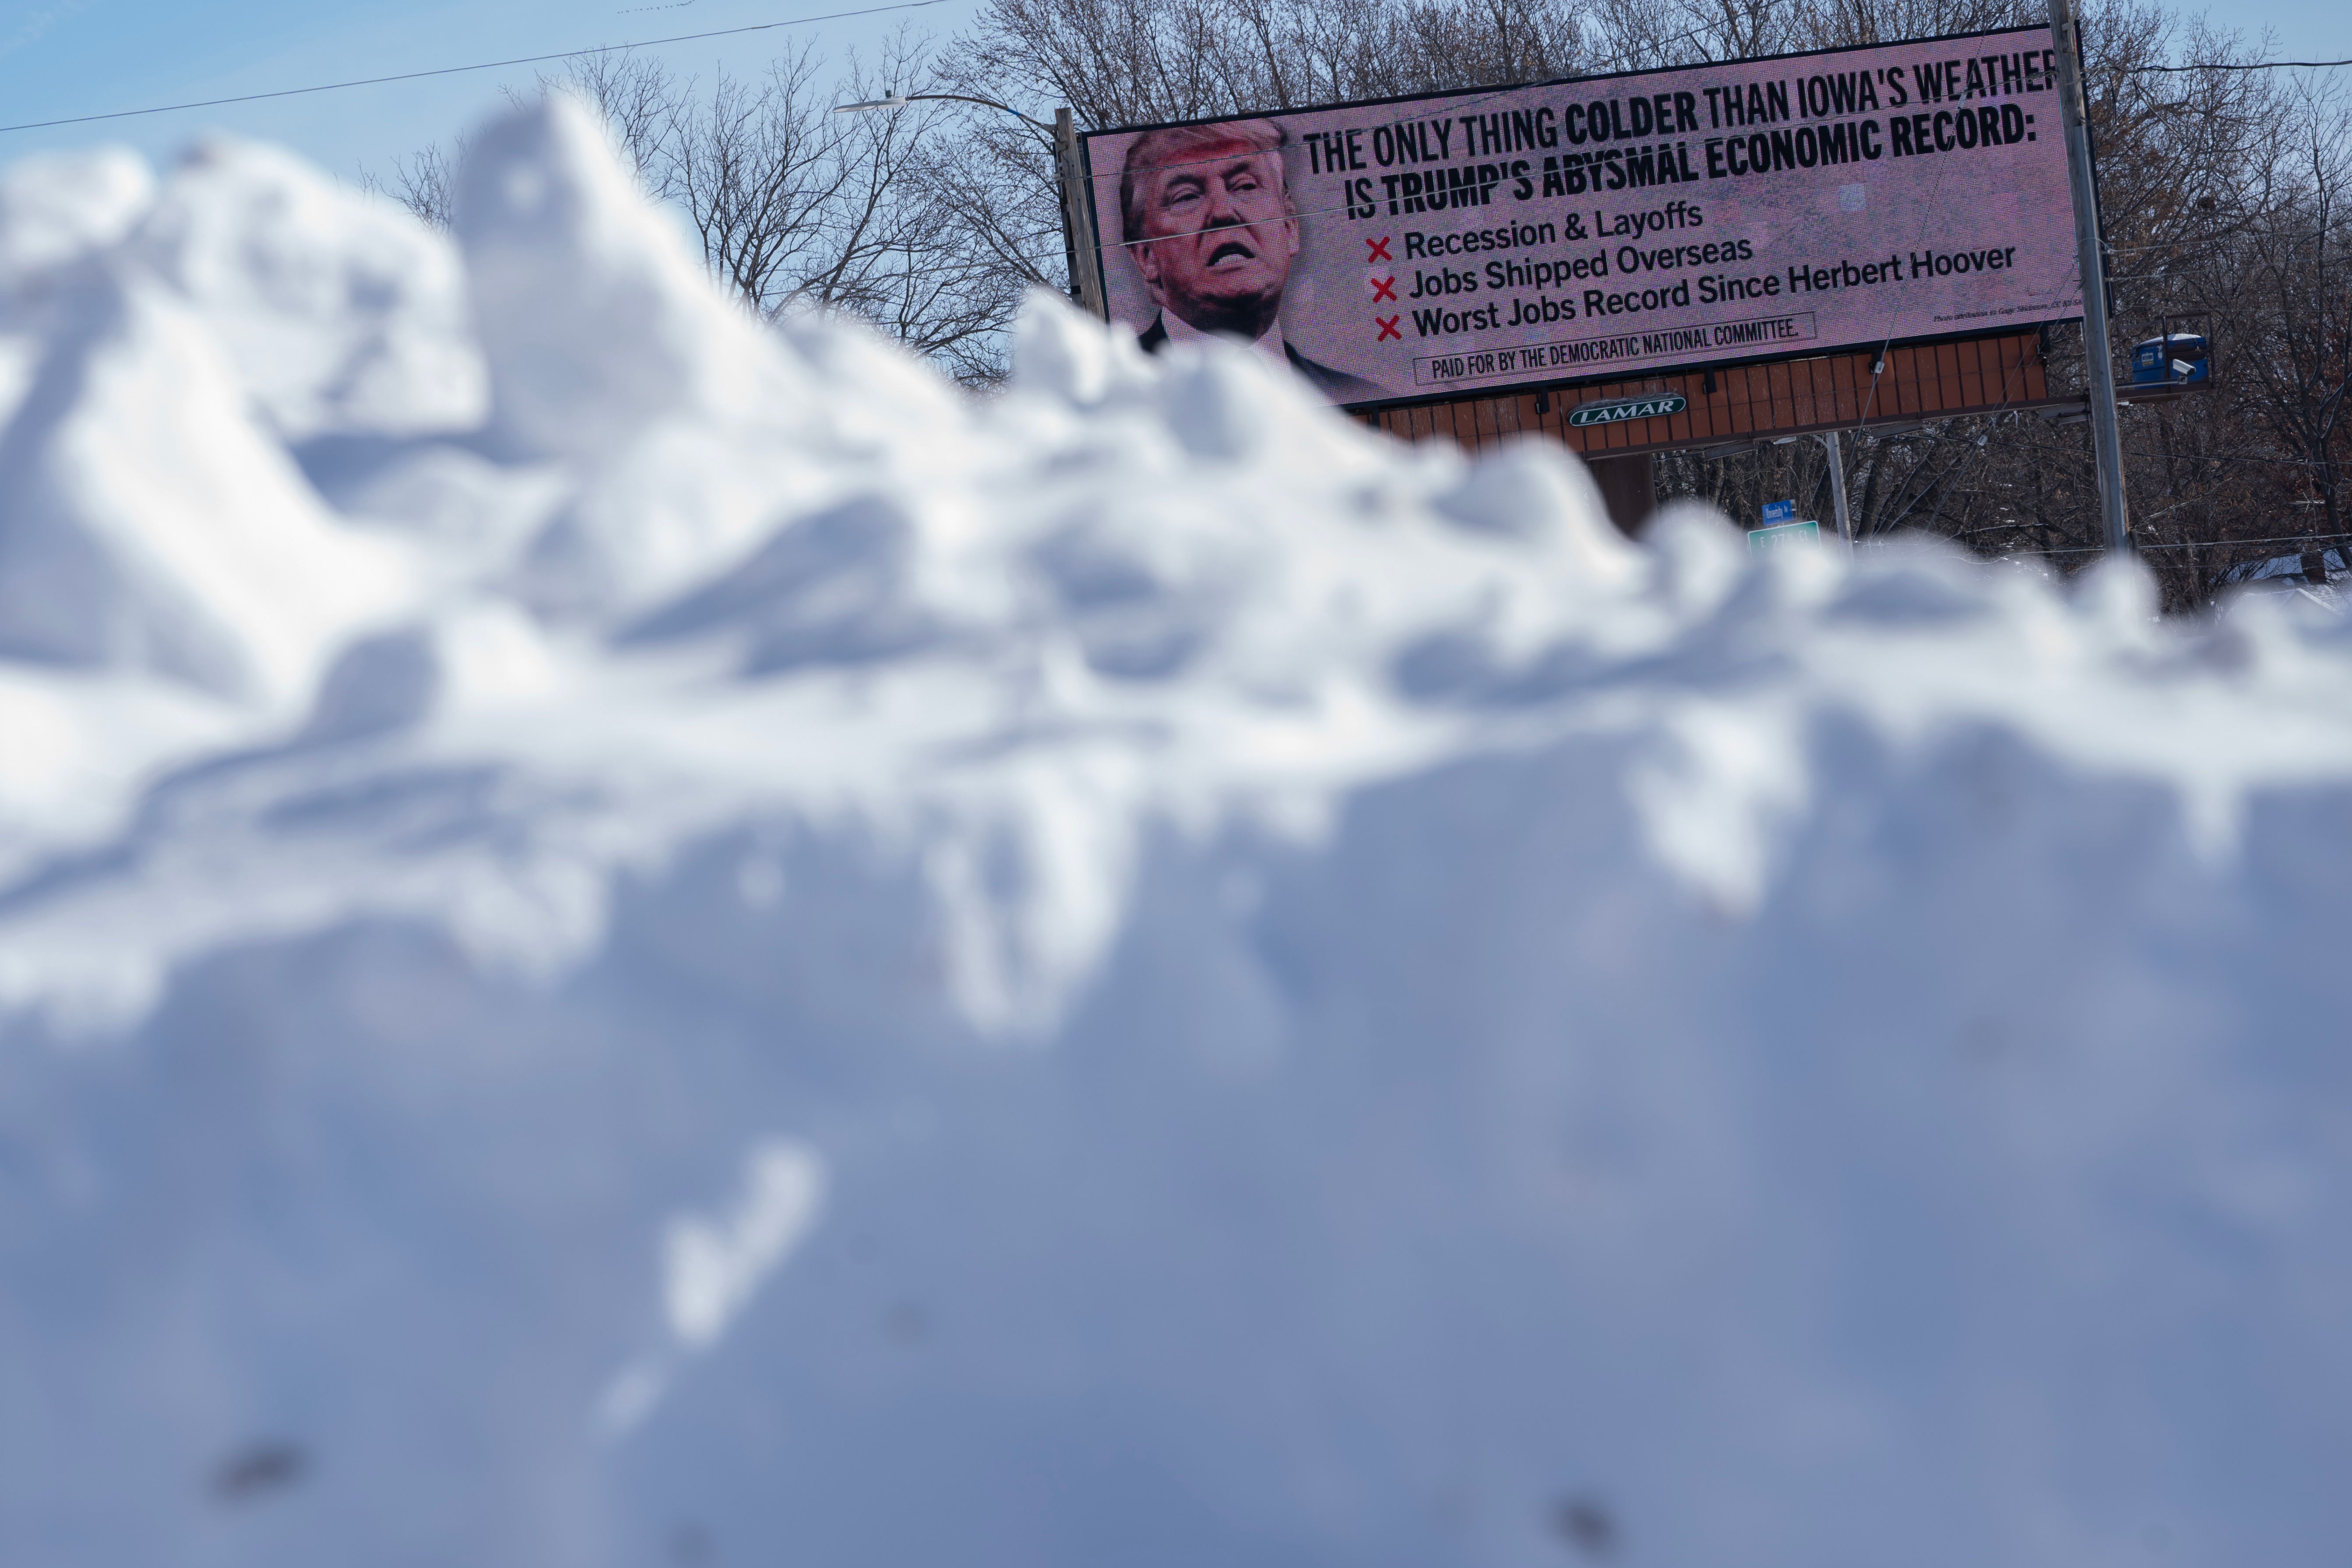 A billboard targeting former US President Donald Trump ahead of the Iowa caucus in Des Moines, Iowa, US, on Sunday, Jan. 14, 2024. Iowans on Monday will cast the first votes in the 2024 presidential nominating process during a caucus that's likely to show depressed turnout because of historically frigid weather. 